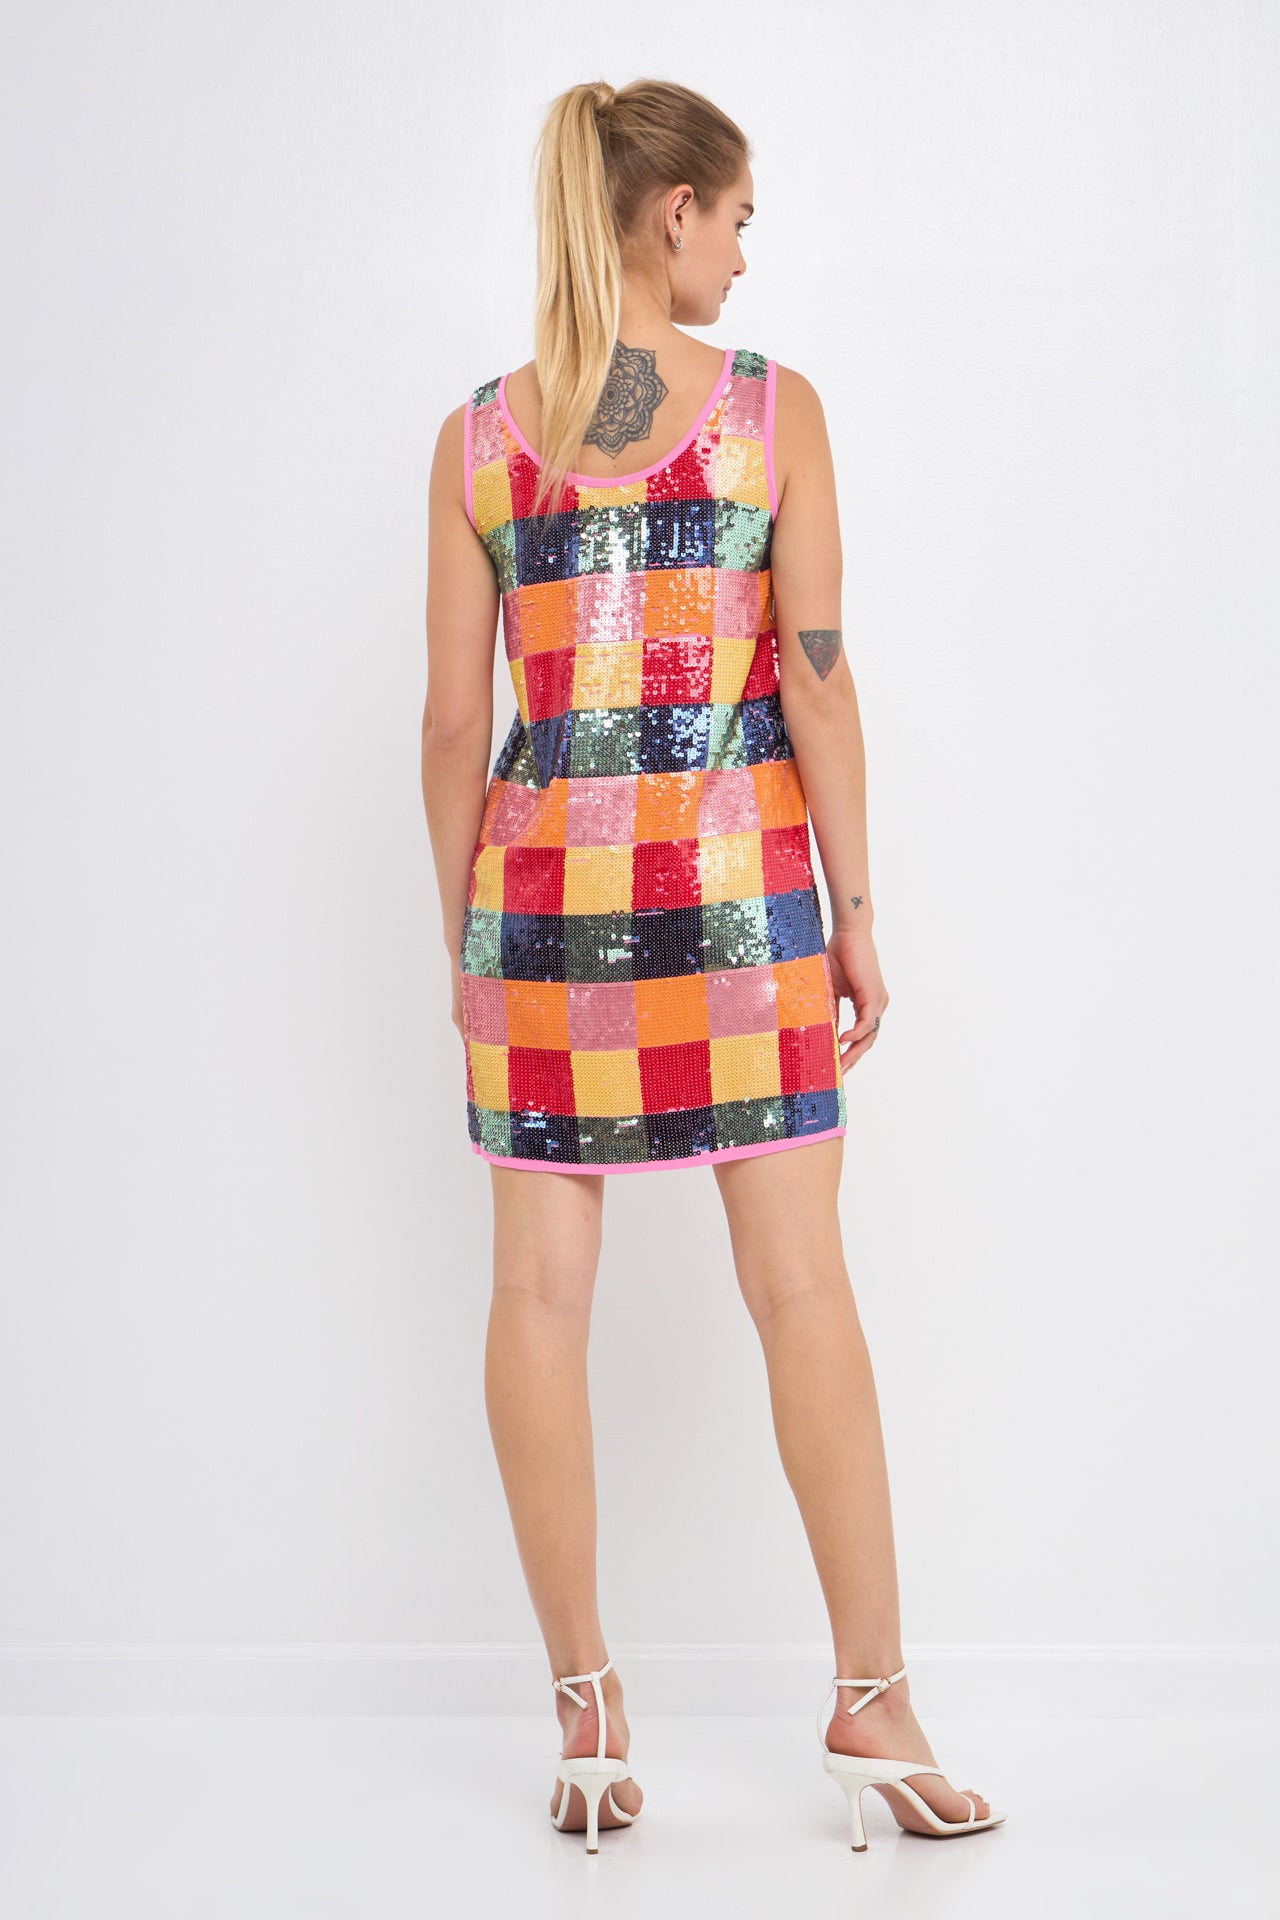 ENDLESS ROSE - Checkered Sequin Mini Dress - DRESSES available at Objectrare